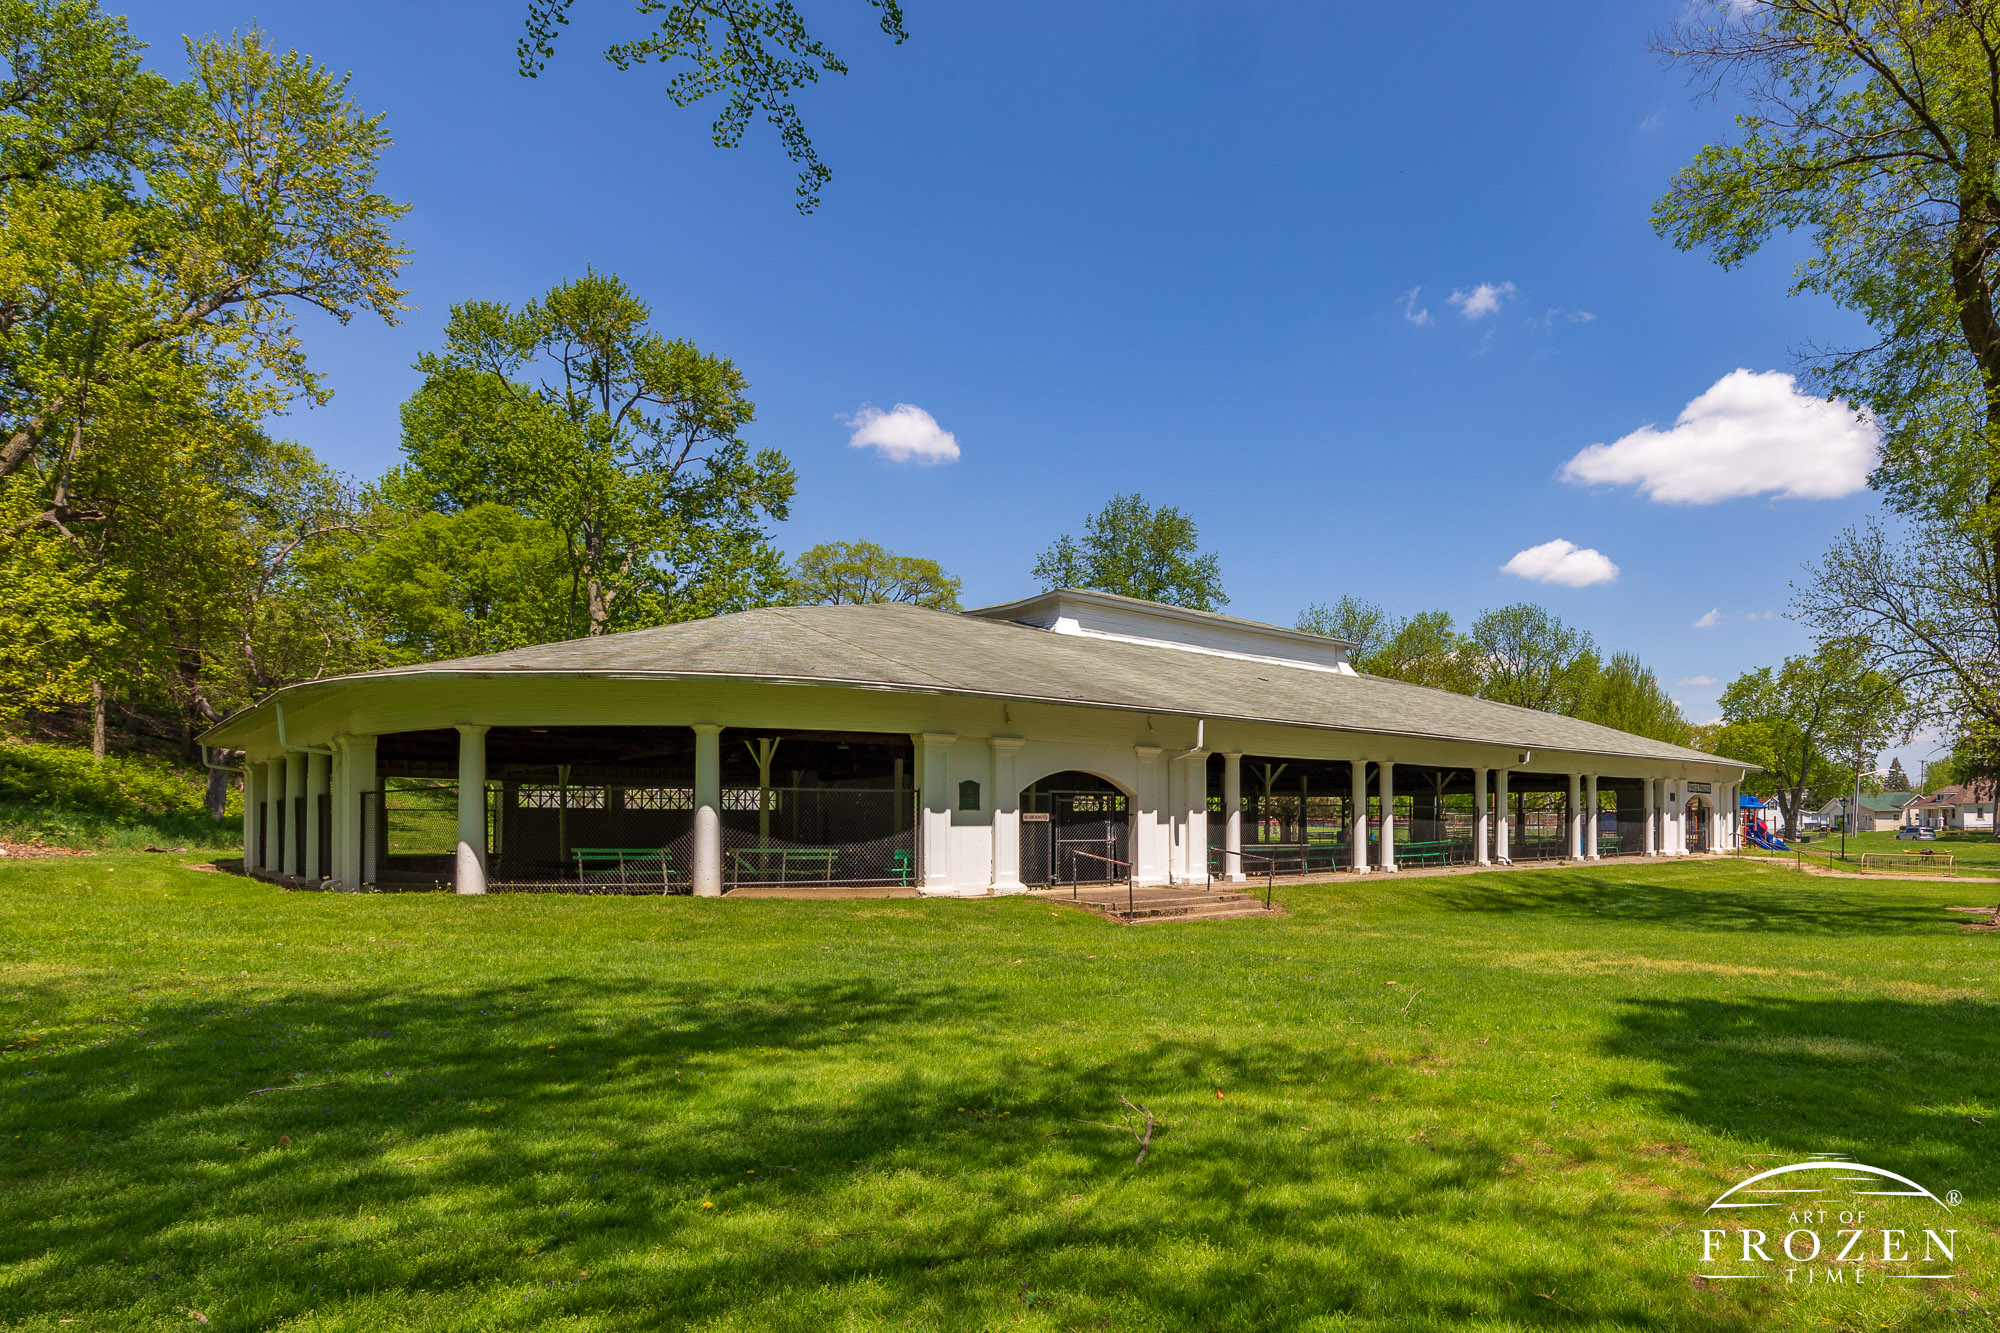 An open-air venue in Fountain Park offers guest plenty of shade trees on this spring day as a few puffy clouds pass through the blue sky